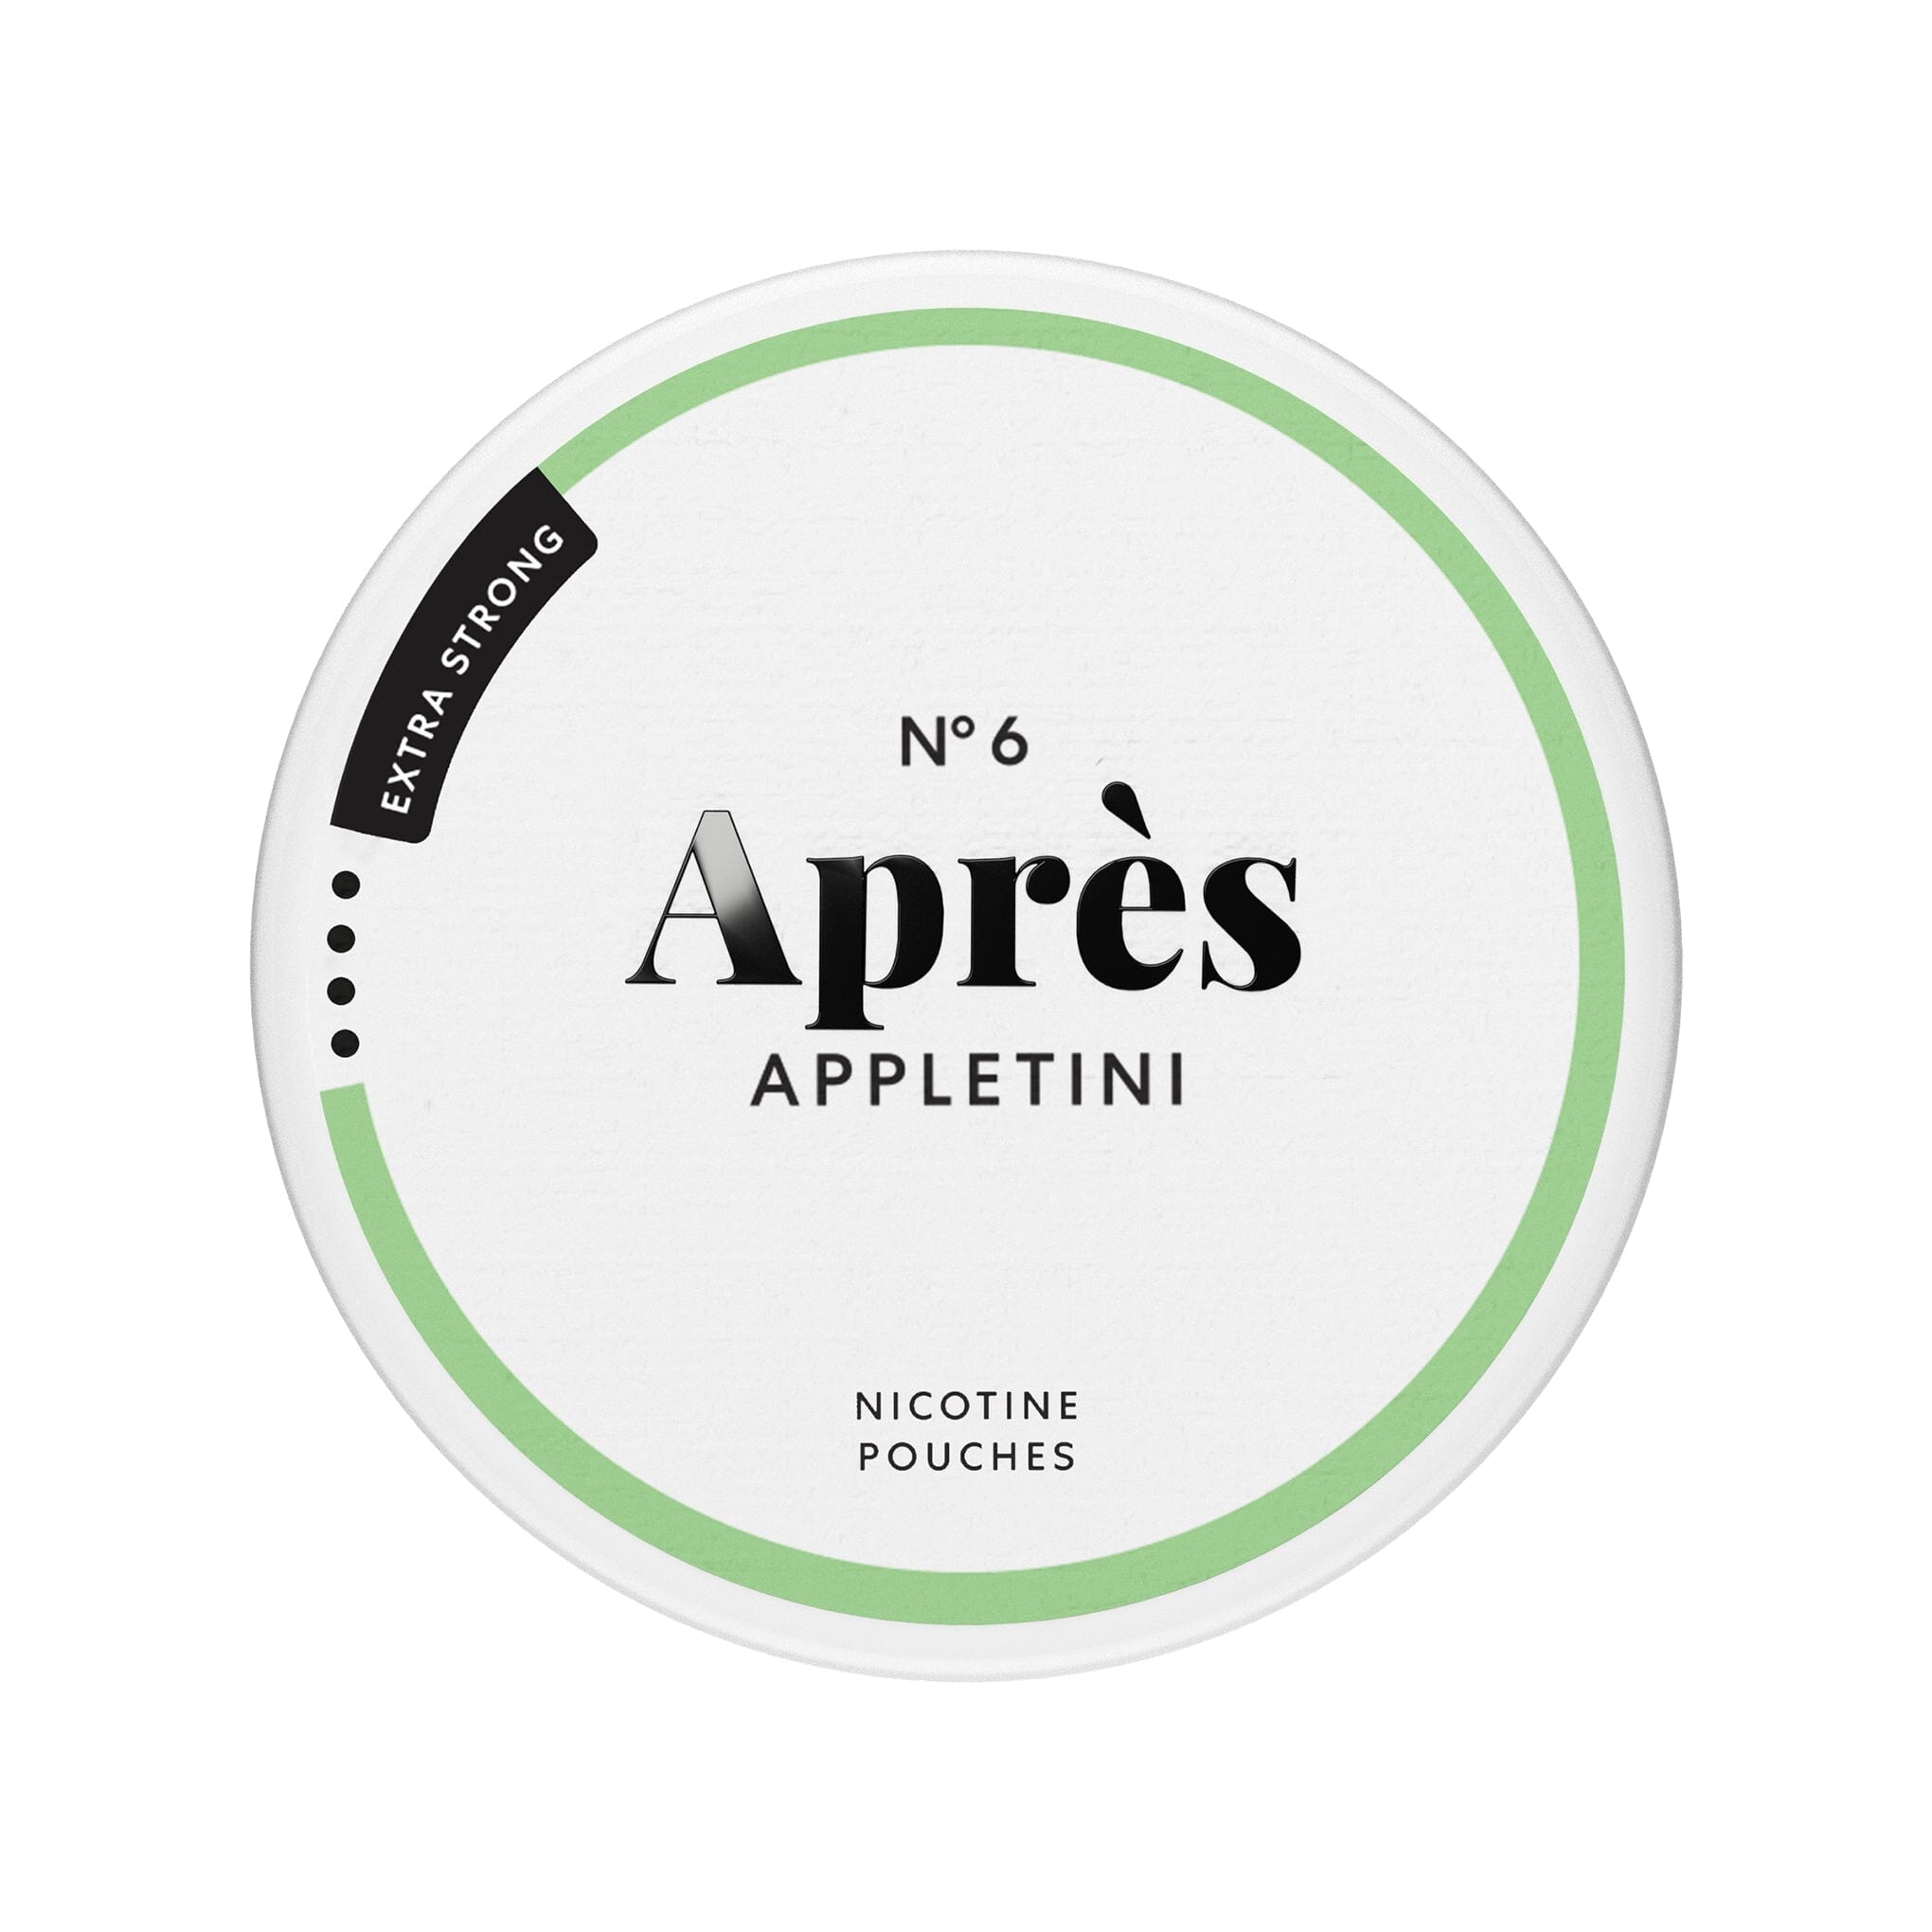 Après Nicotine Pouches Appletini Extra Strong - 15MG/G 